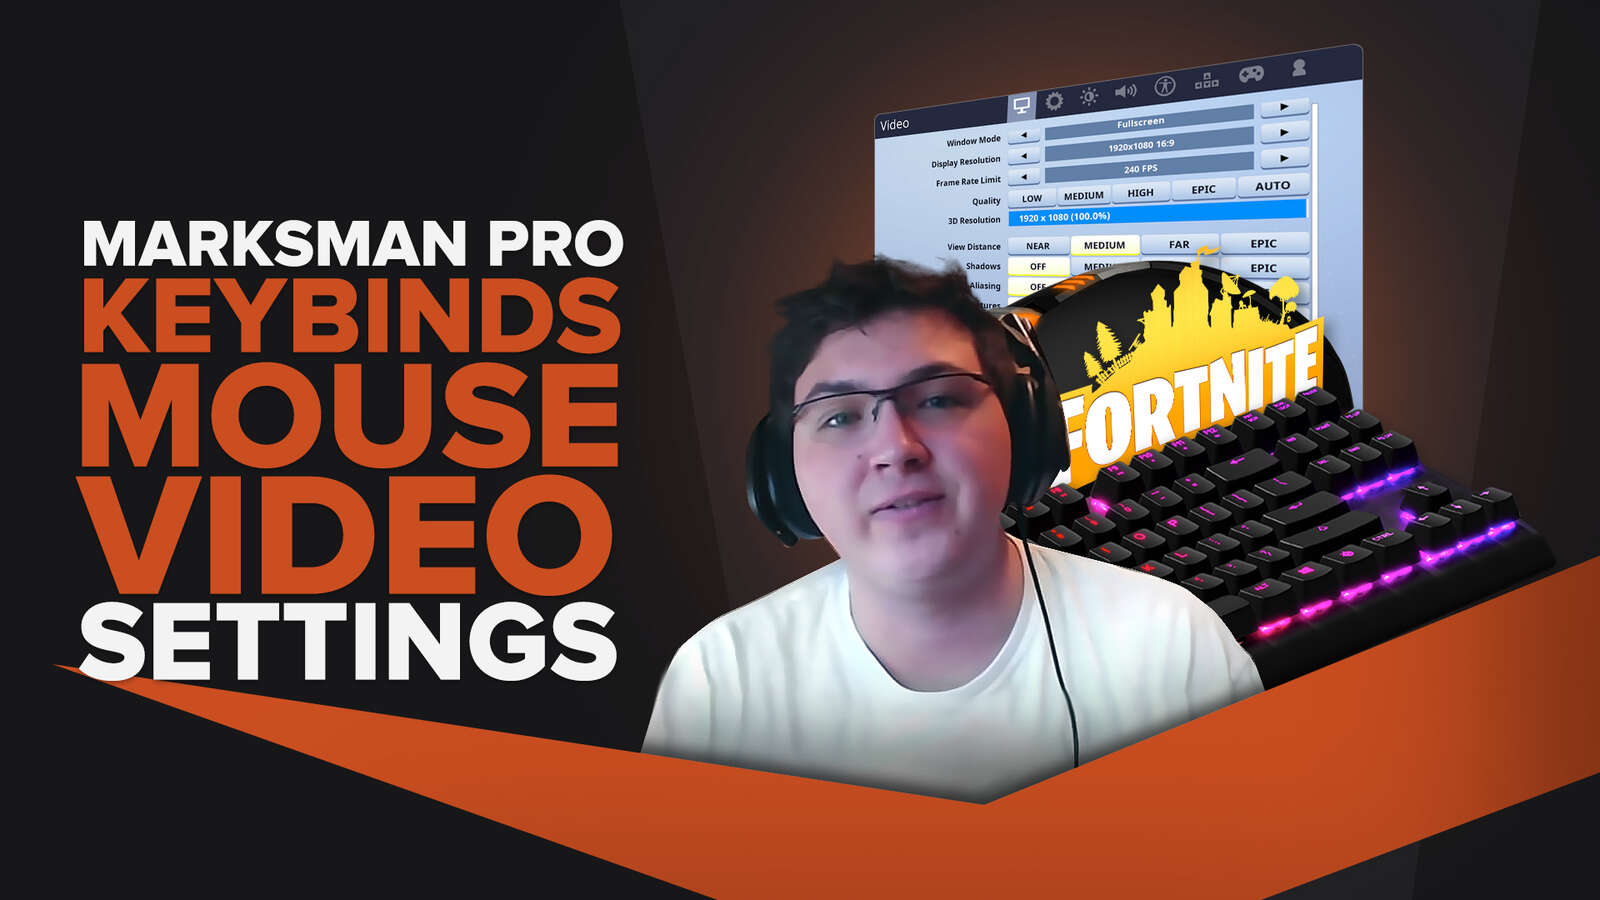 Marksman's | Keybinds, Mouse, Video Pro Fornite Settings